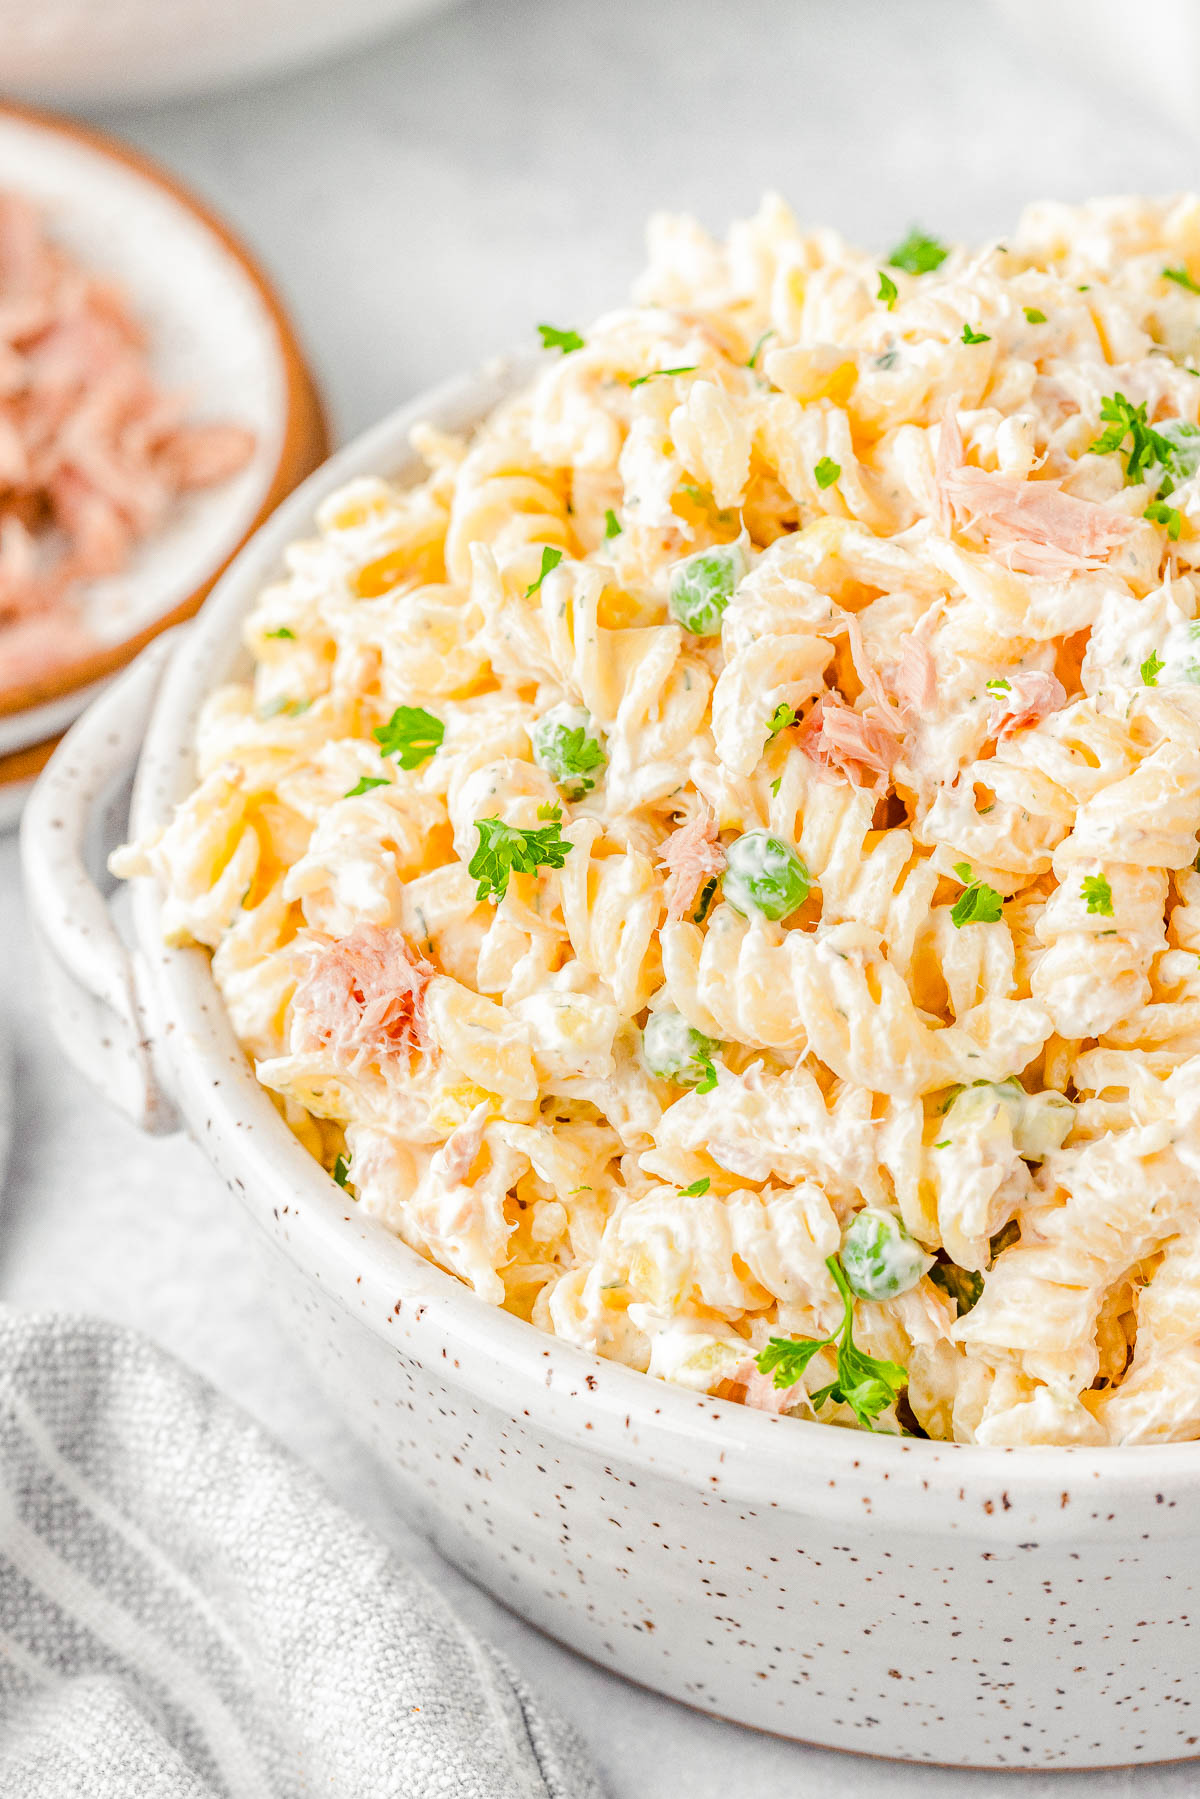 A bowl of creamy pasta salad with rotini noodles, topped with bits of ham and garnished with fresh parsley.